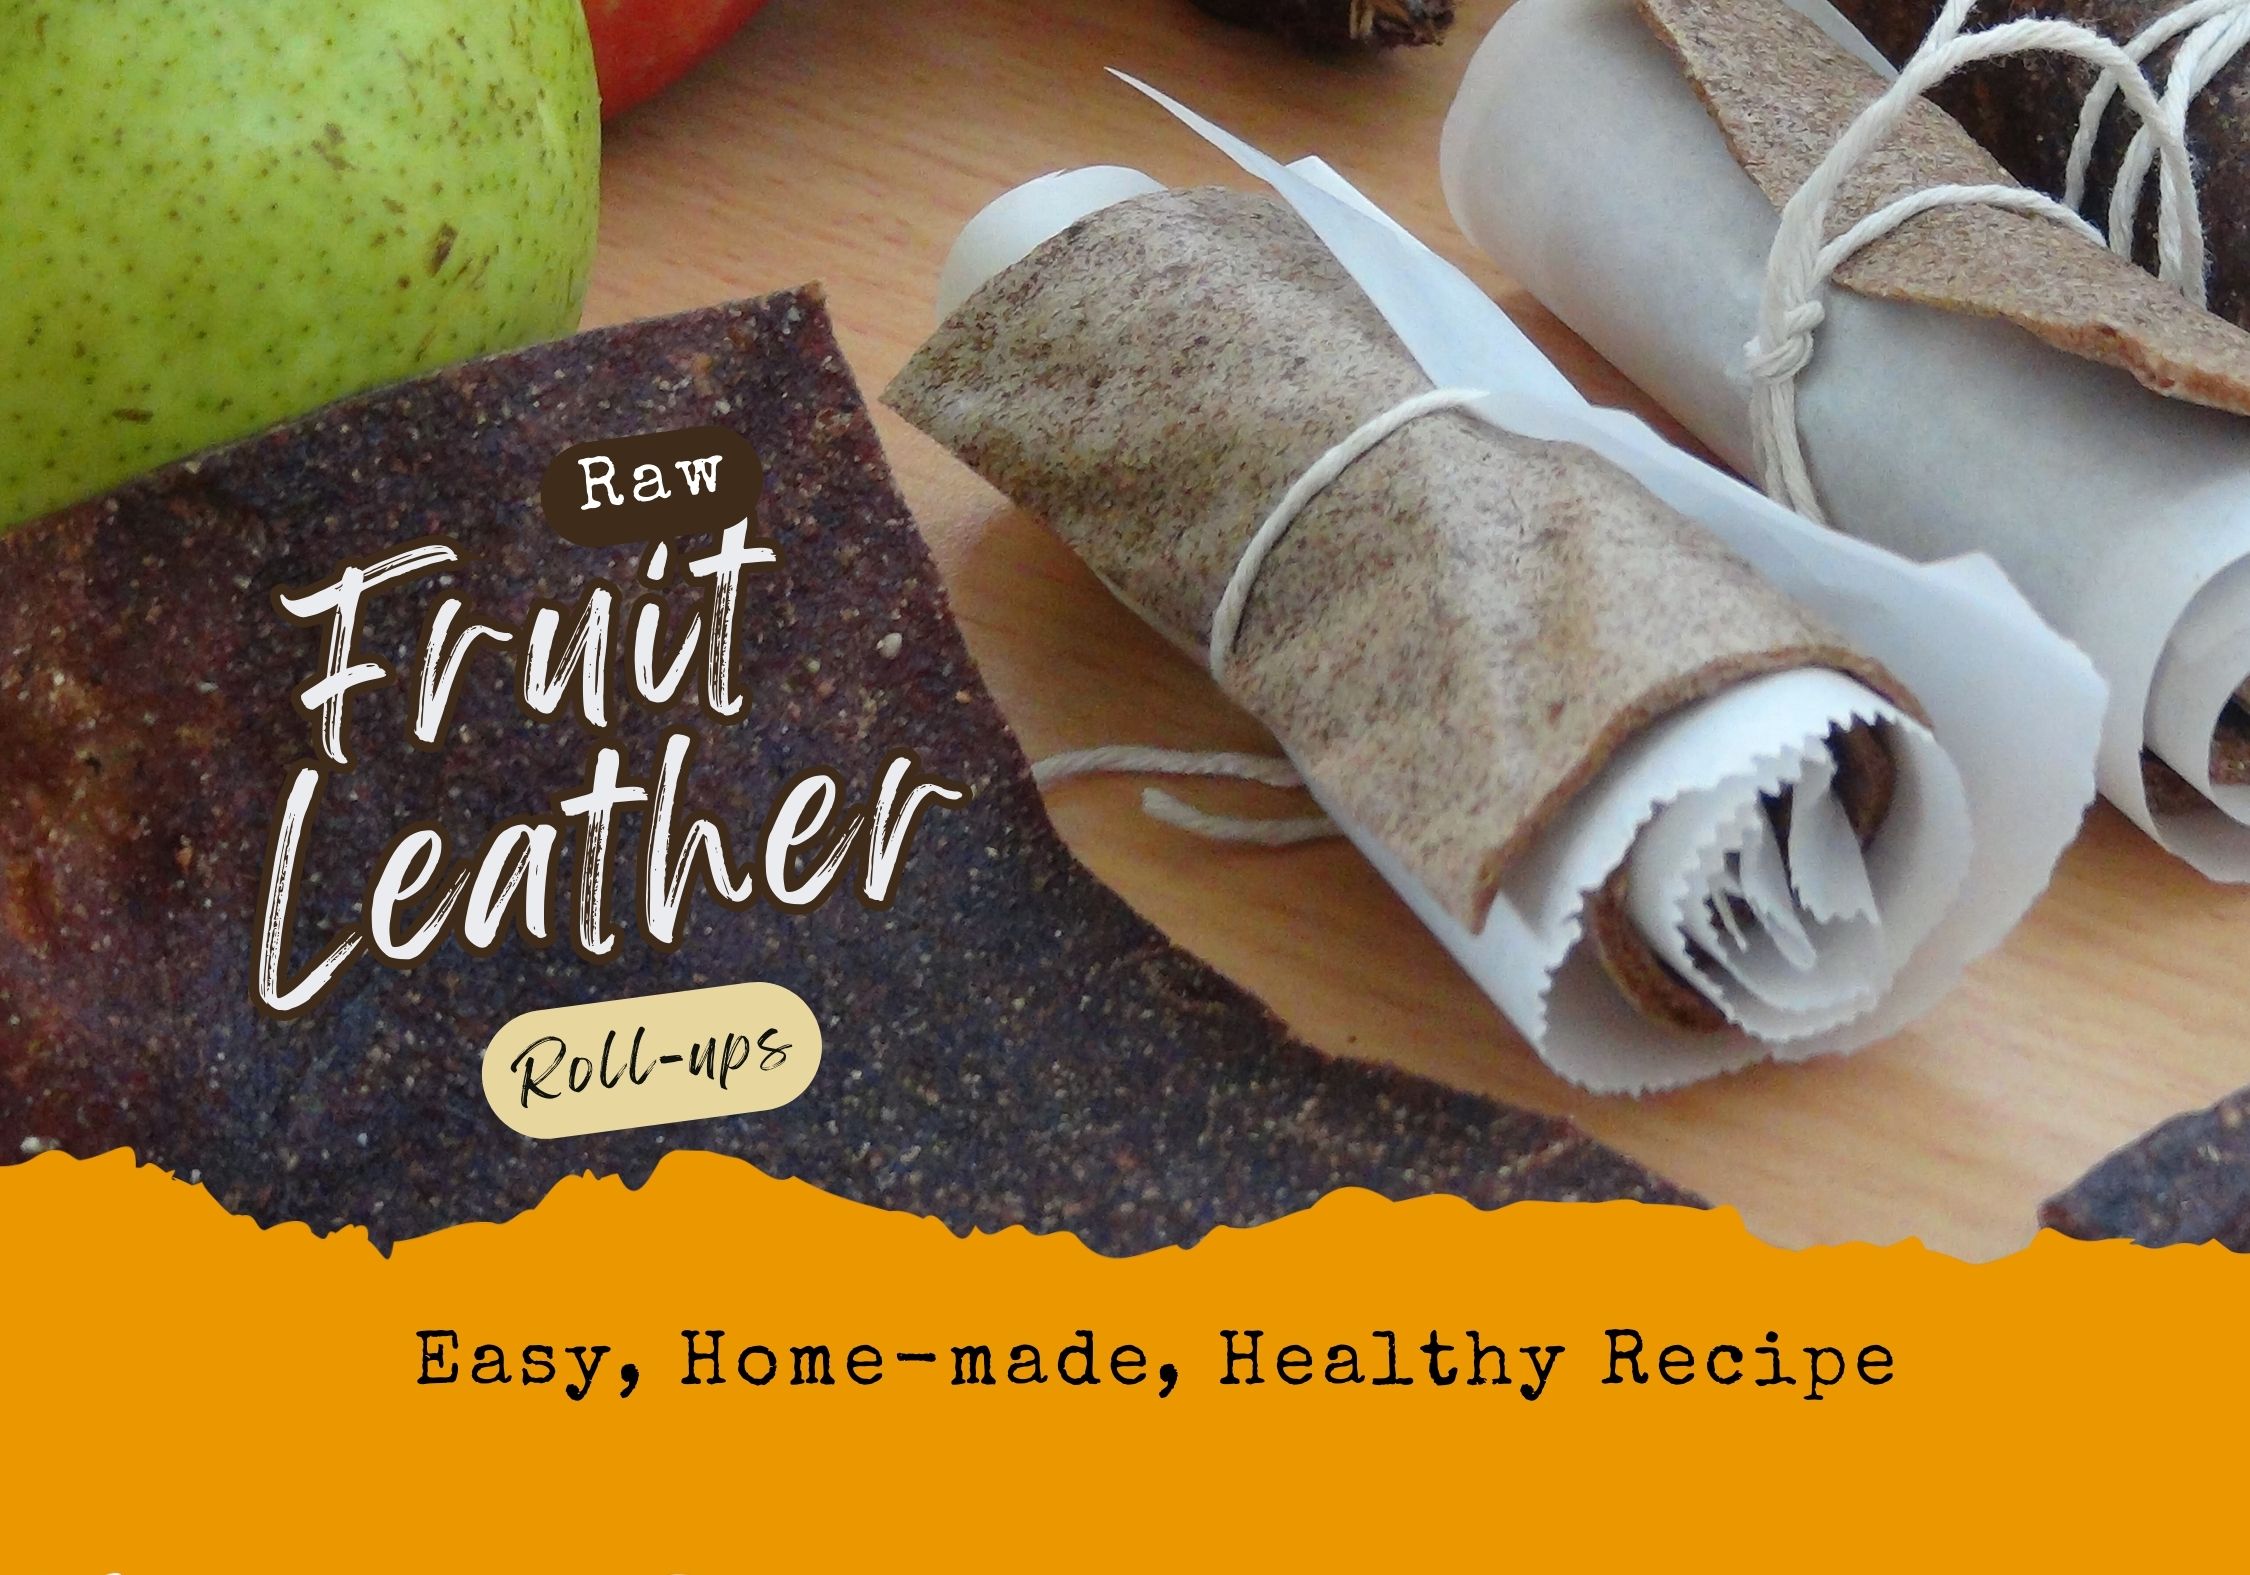 Raw Fruit Leather Roll ups Recipe